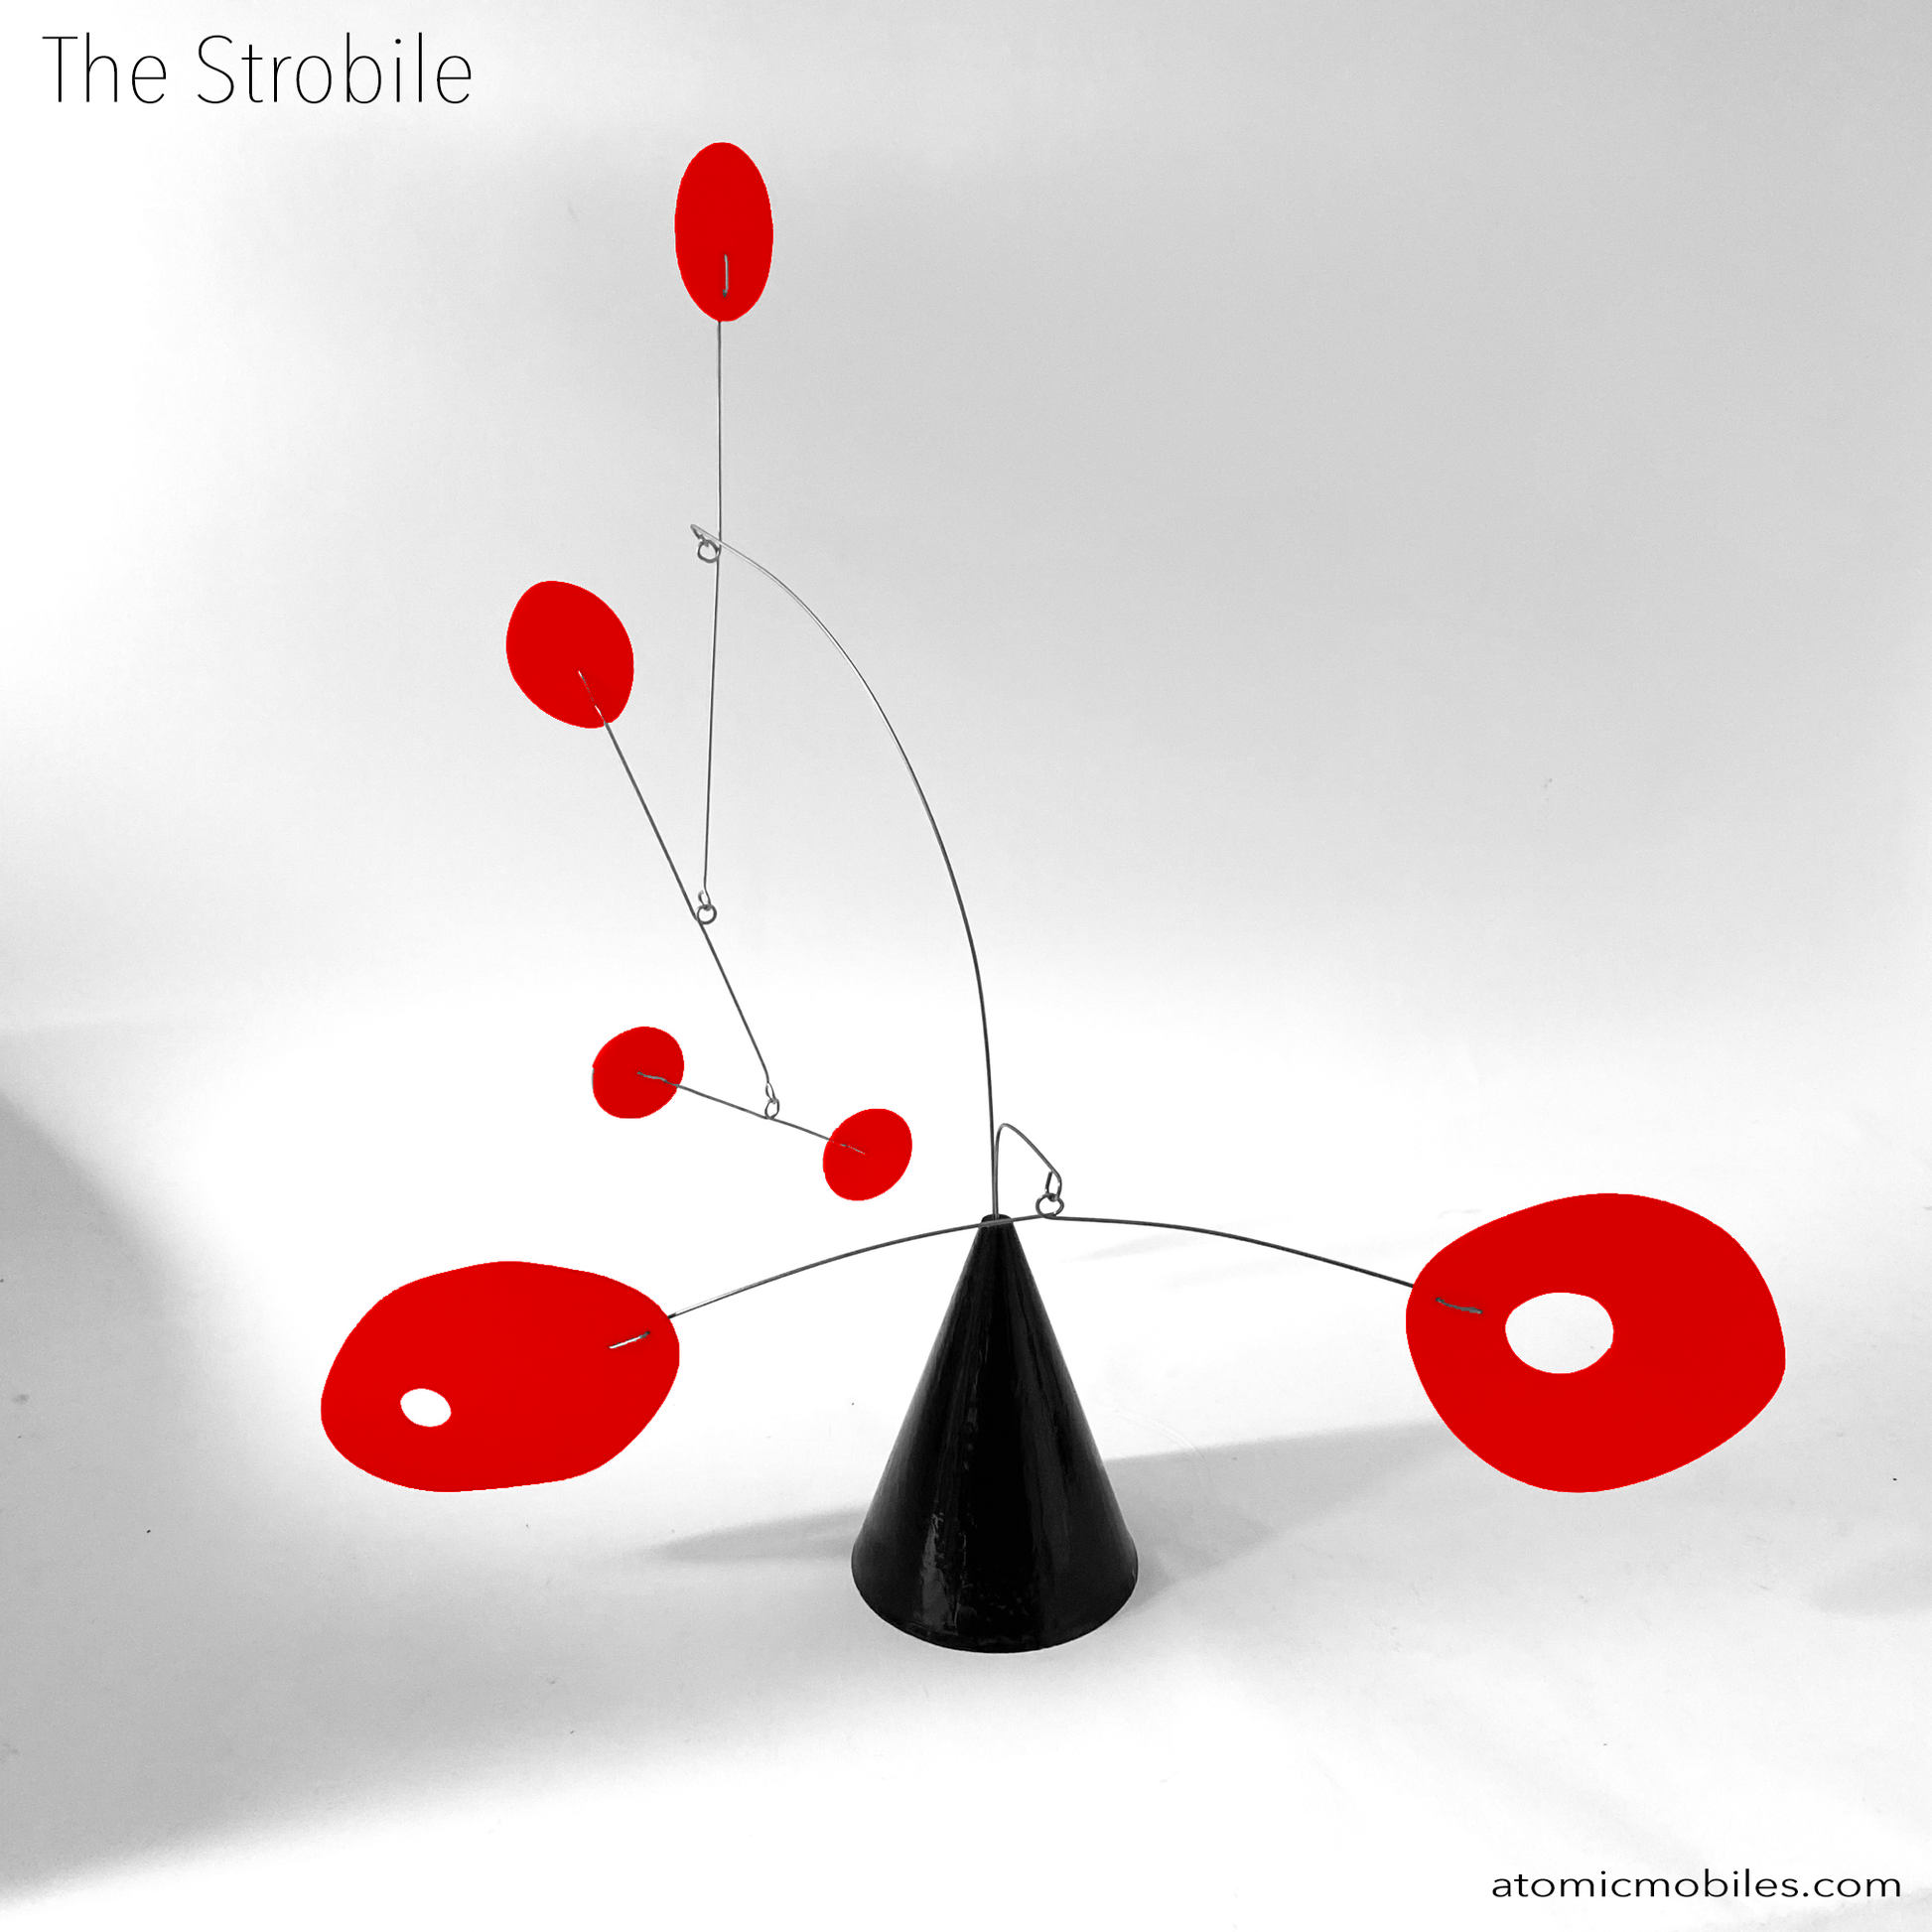 The Strobile table top kinetic art sculpture in red and black by AtomicMobiles.com